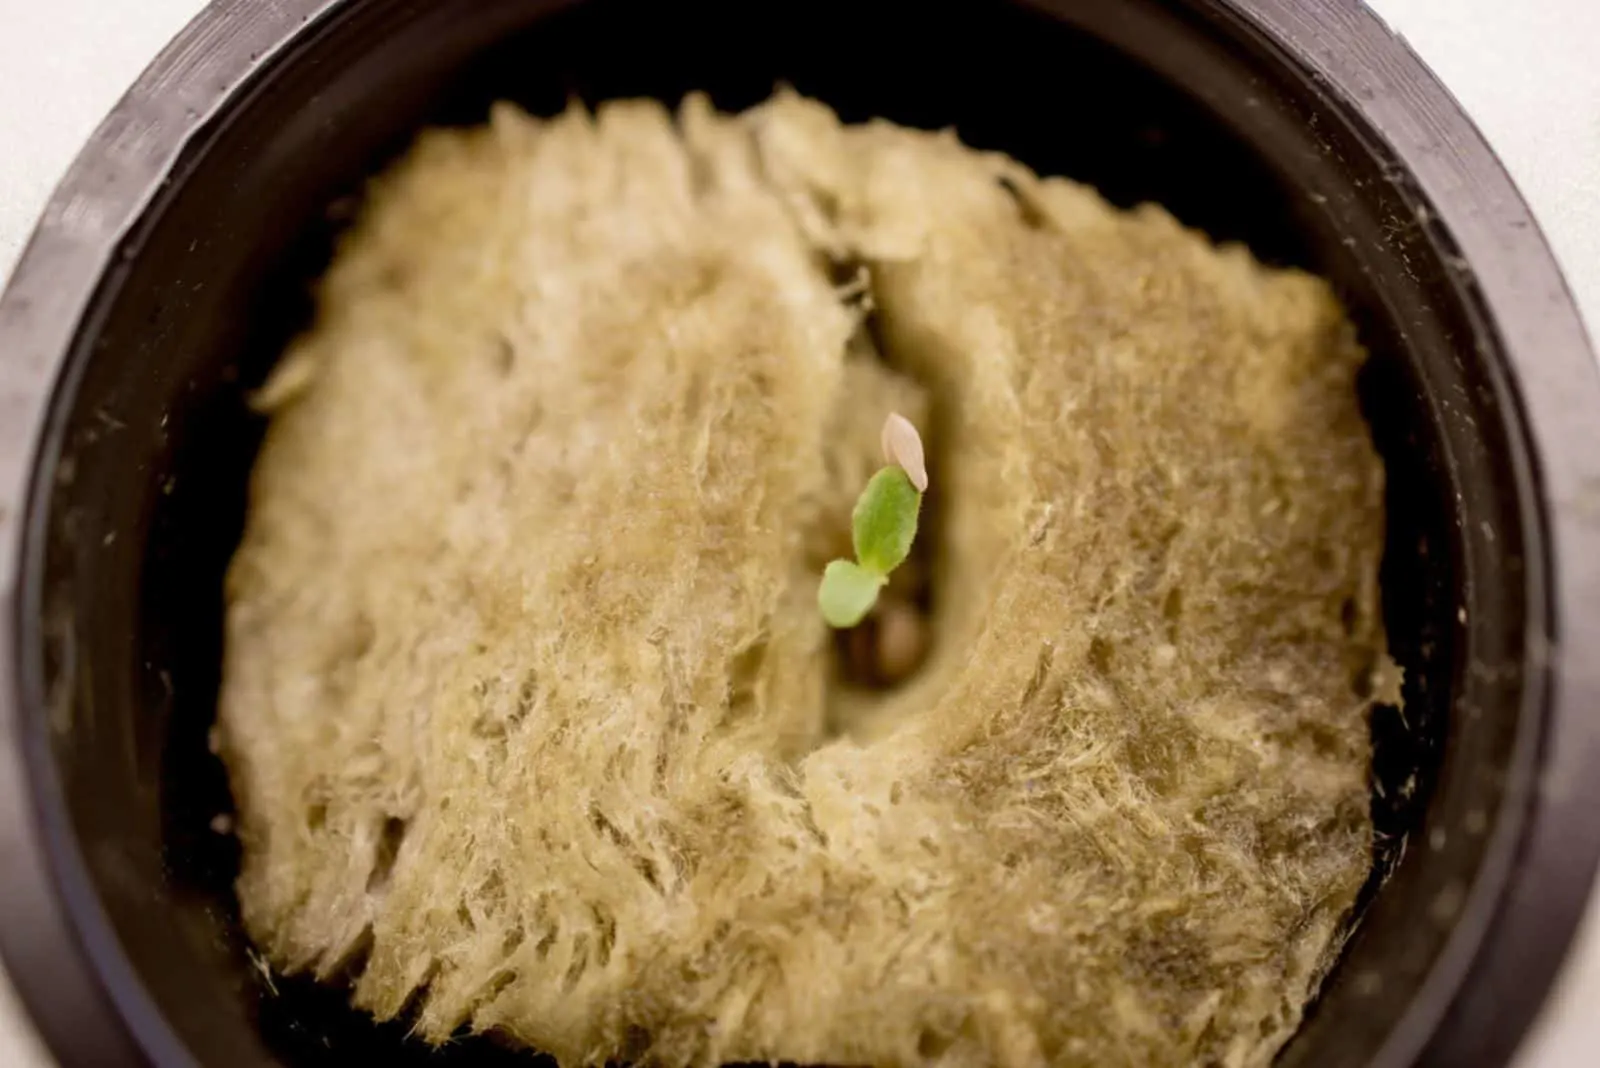 green sprout on the rockwool in a pot